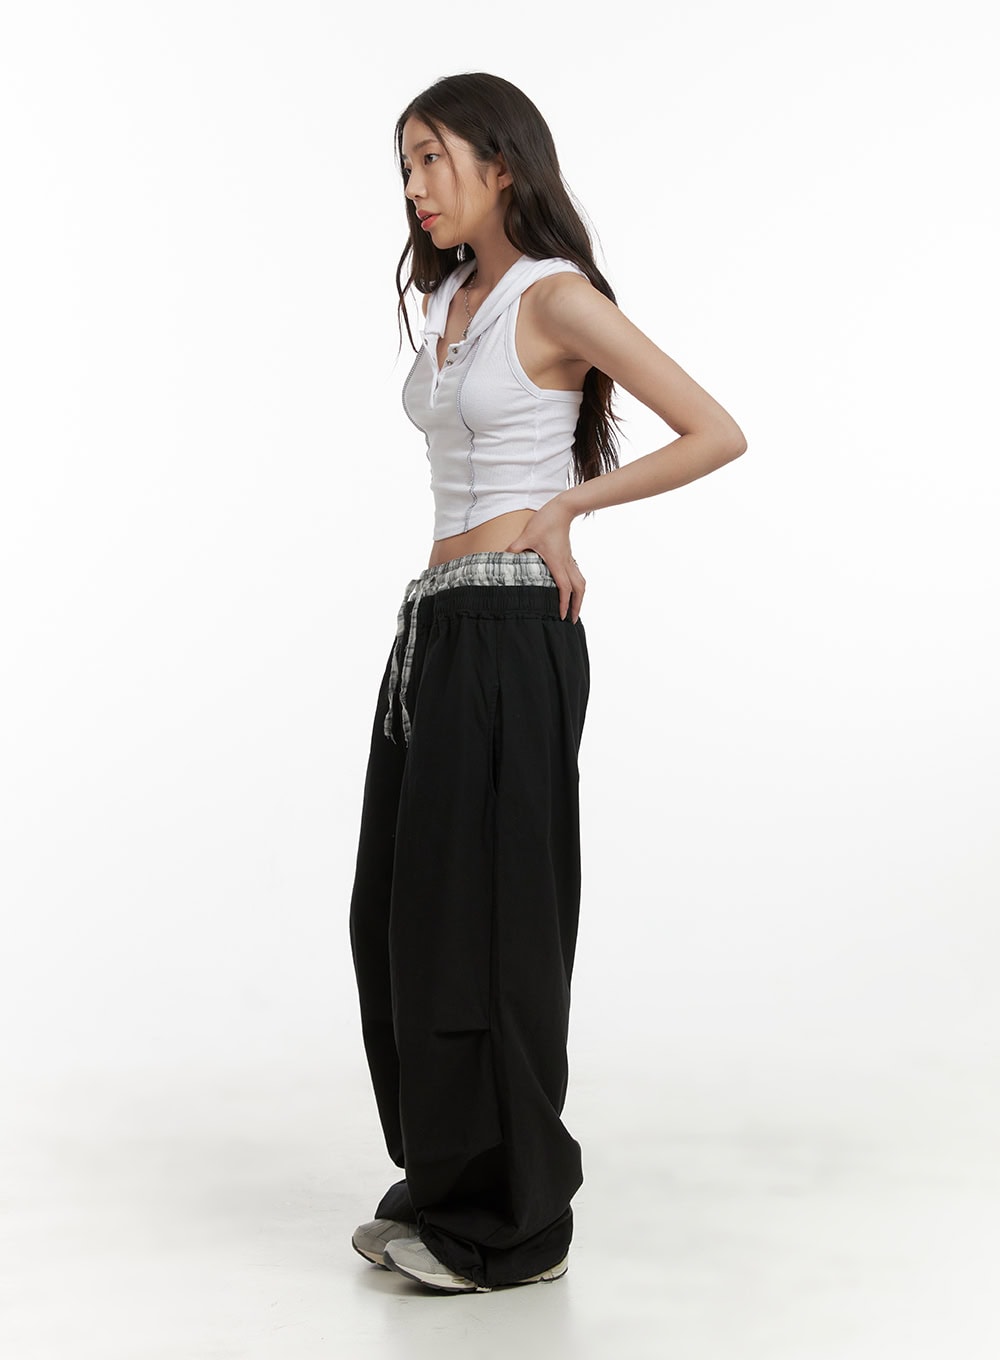 checked-shorts-layered-wide-leg-trousers-cy416